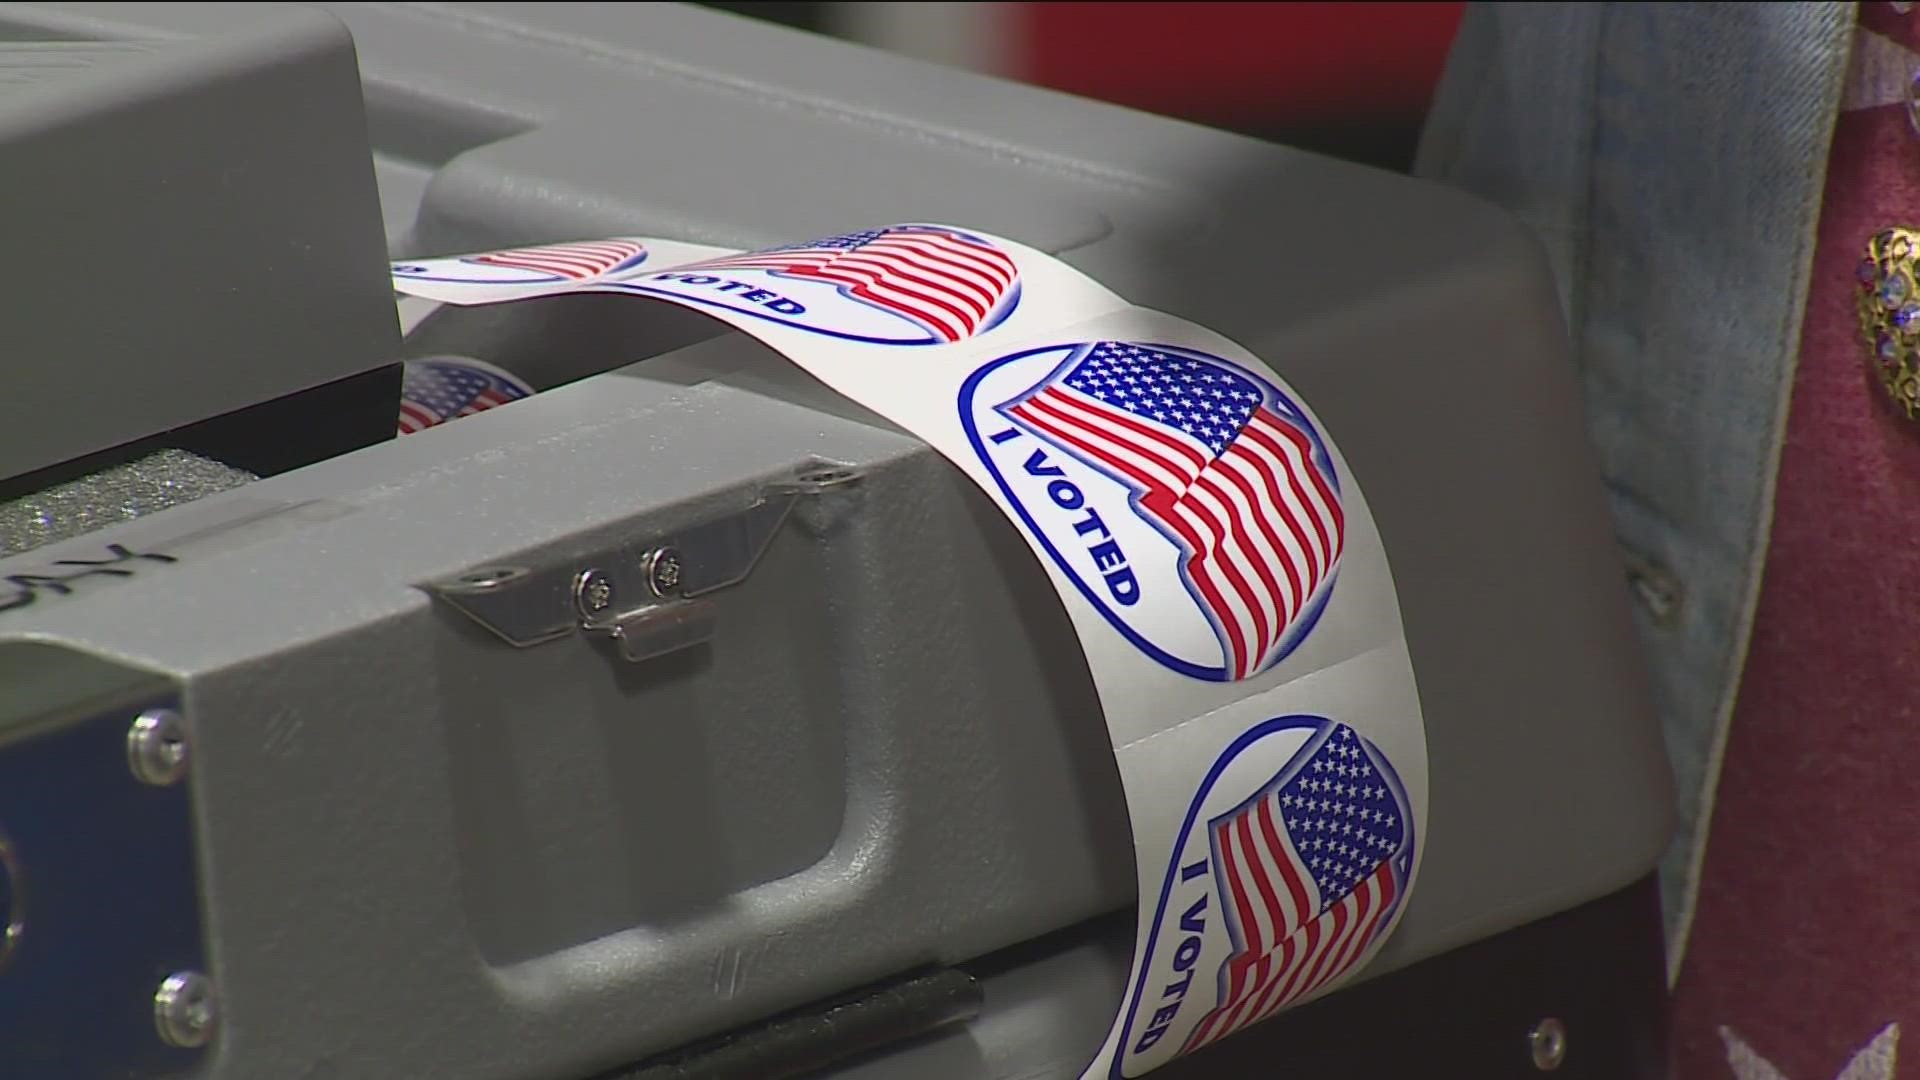 The Arkansas primary election voting concluded today to determine who will appear on ballots during the 2022 midterm elections in November.